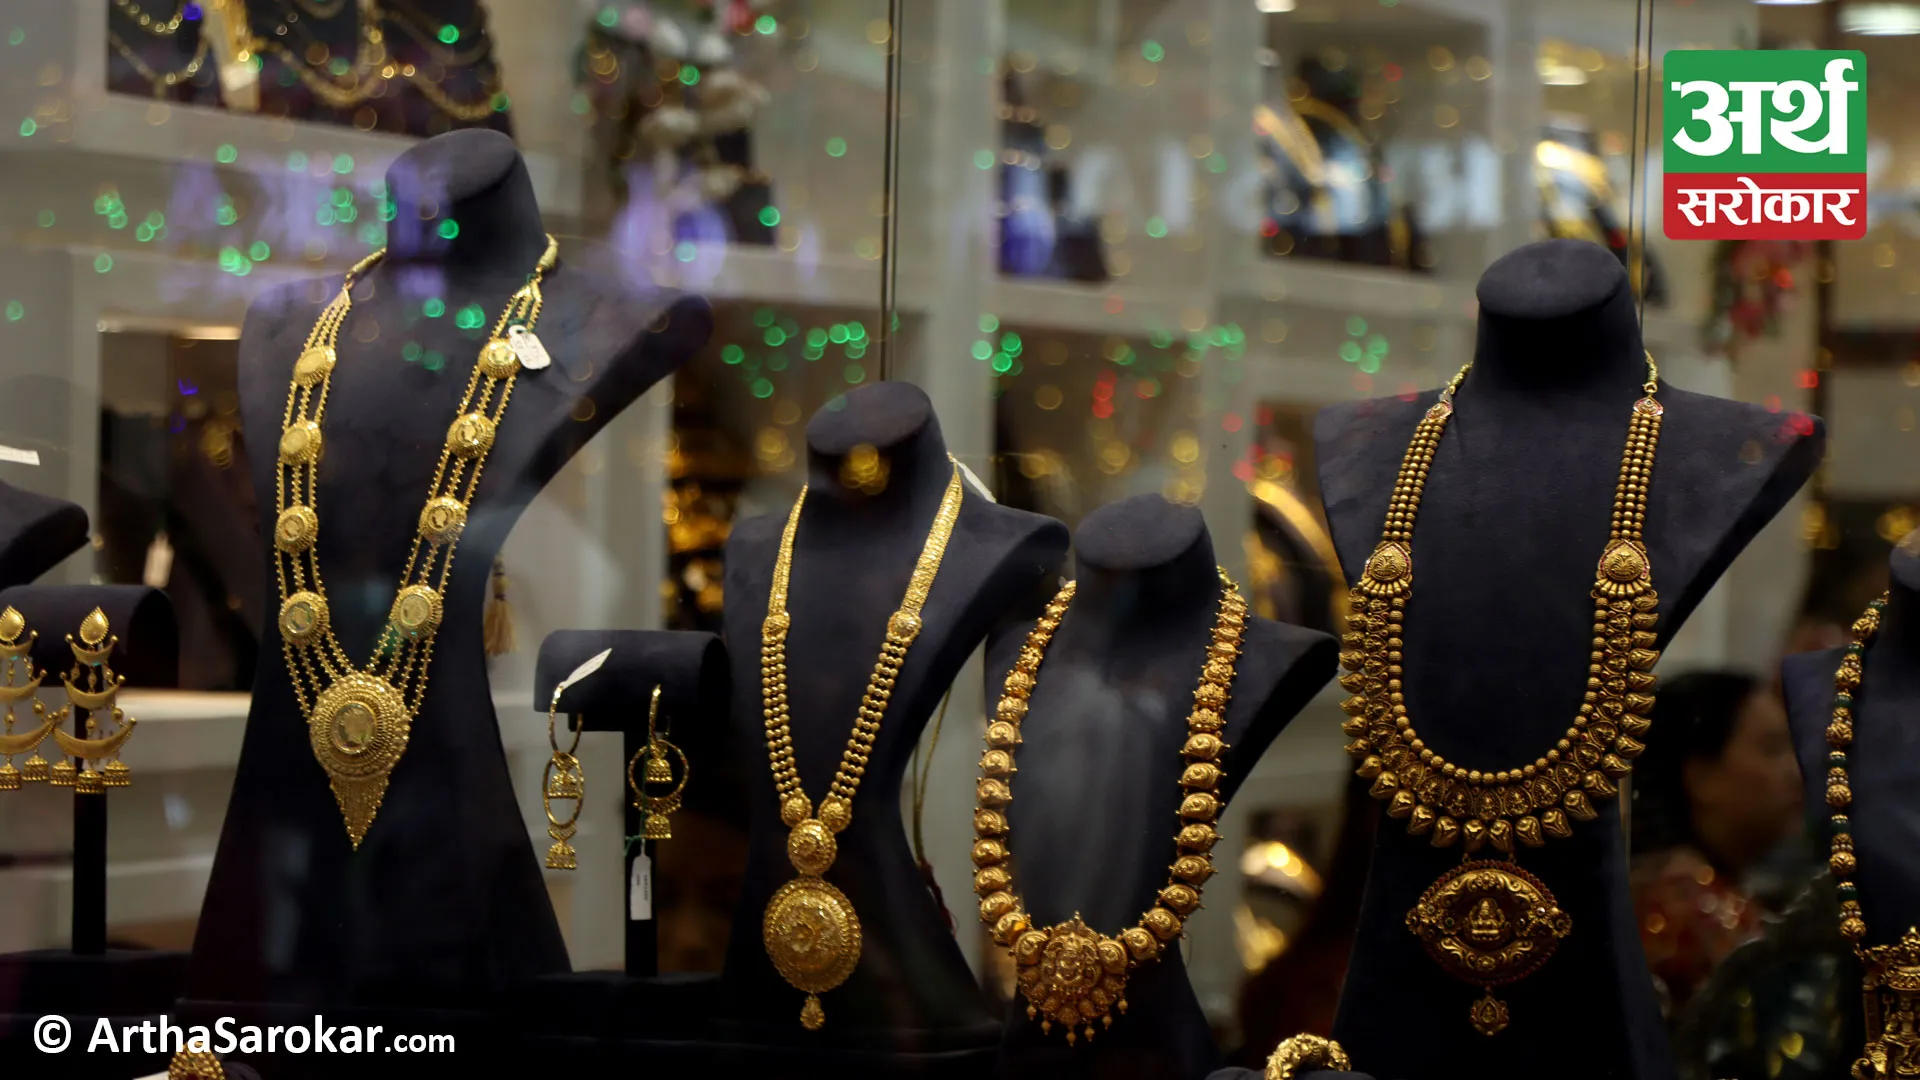 Price of gold decreased by 200 rupees on Friday